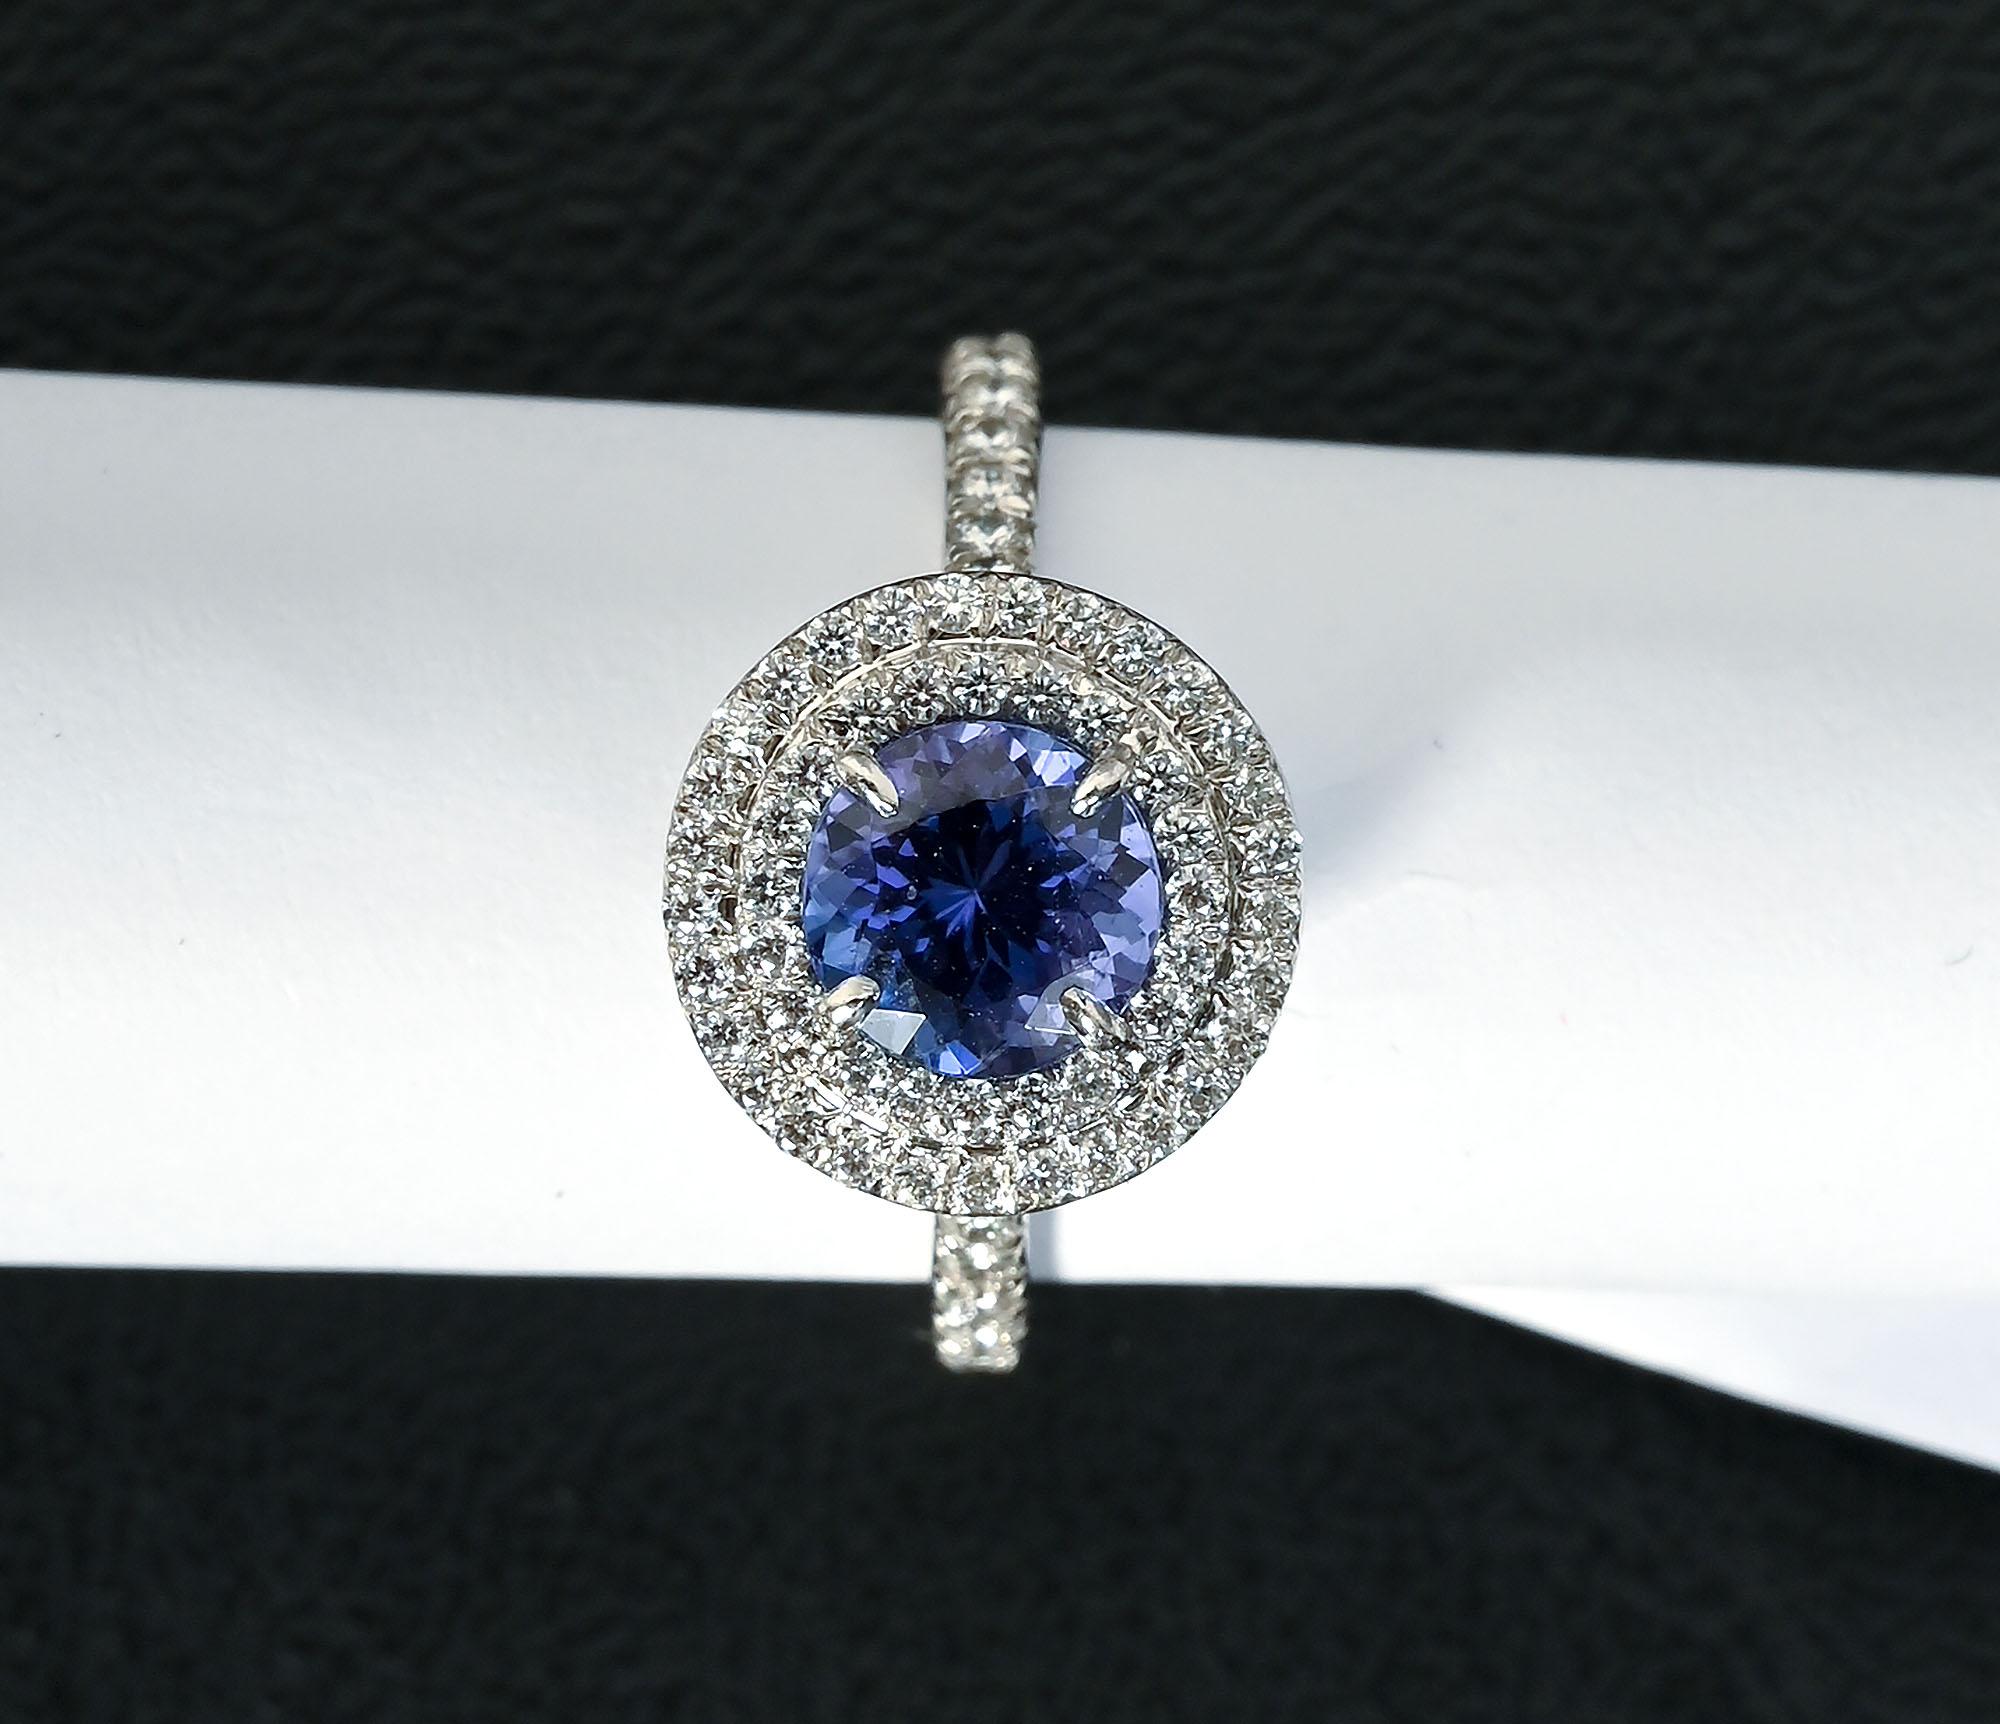 `Graceful and elegant tanzanite and diamond ring by Tiffany from their Soleste Collection. The central tanzanite stone is approximately 1.5 carats. It is surrounded by 2 rows of round brilliant diamonds weighing approximately .45 carats. Diamonds go